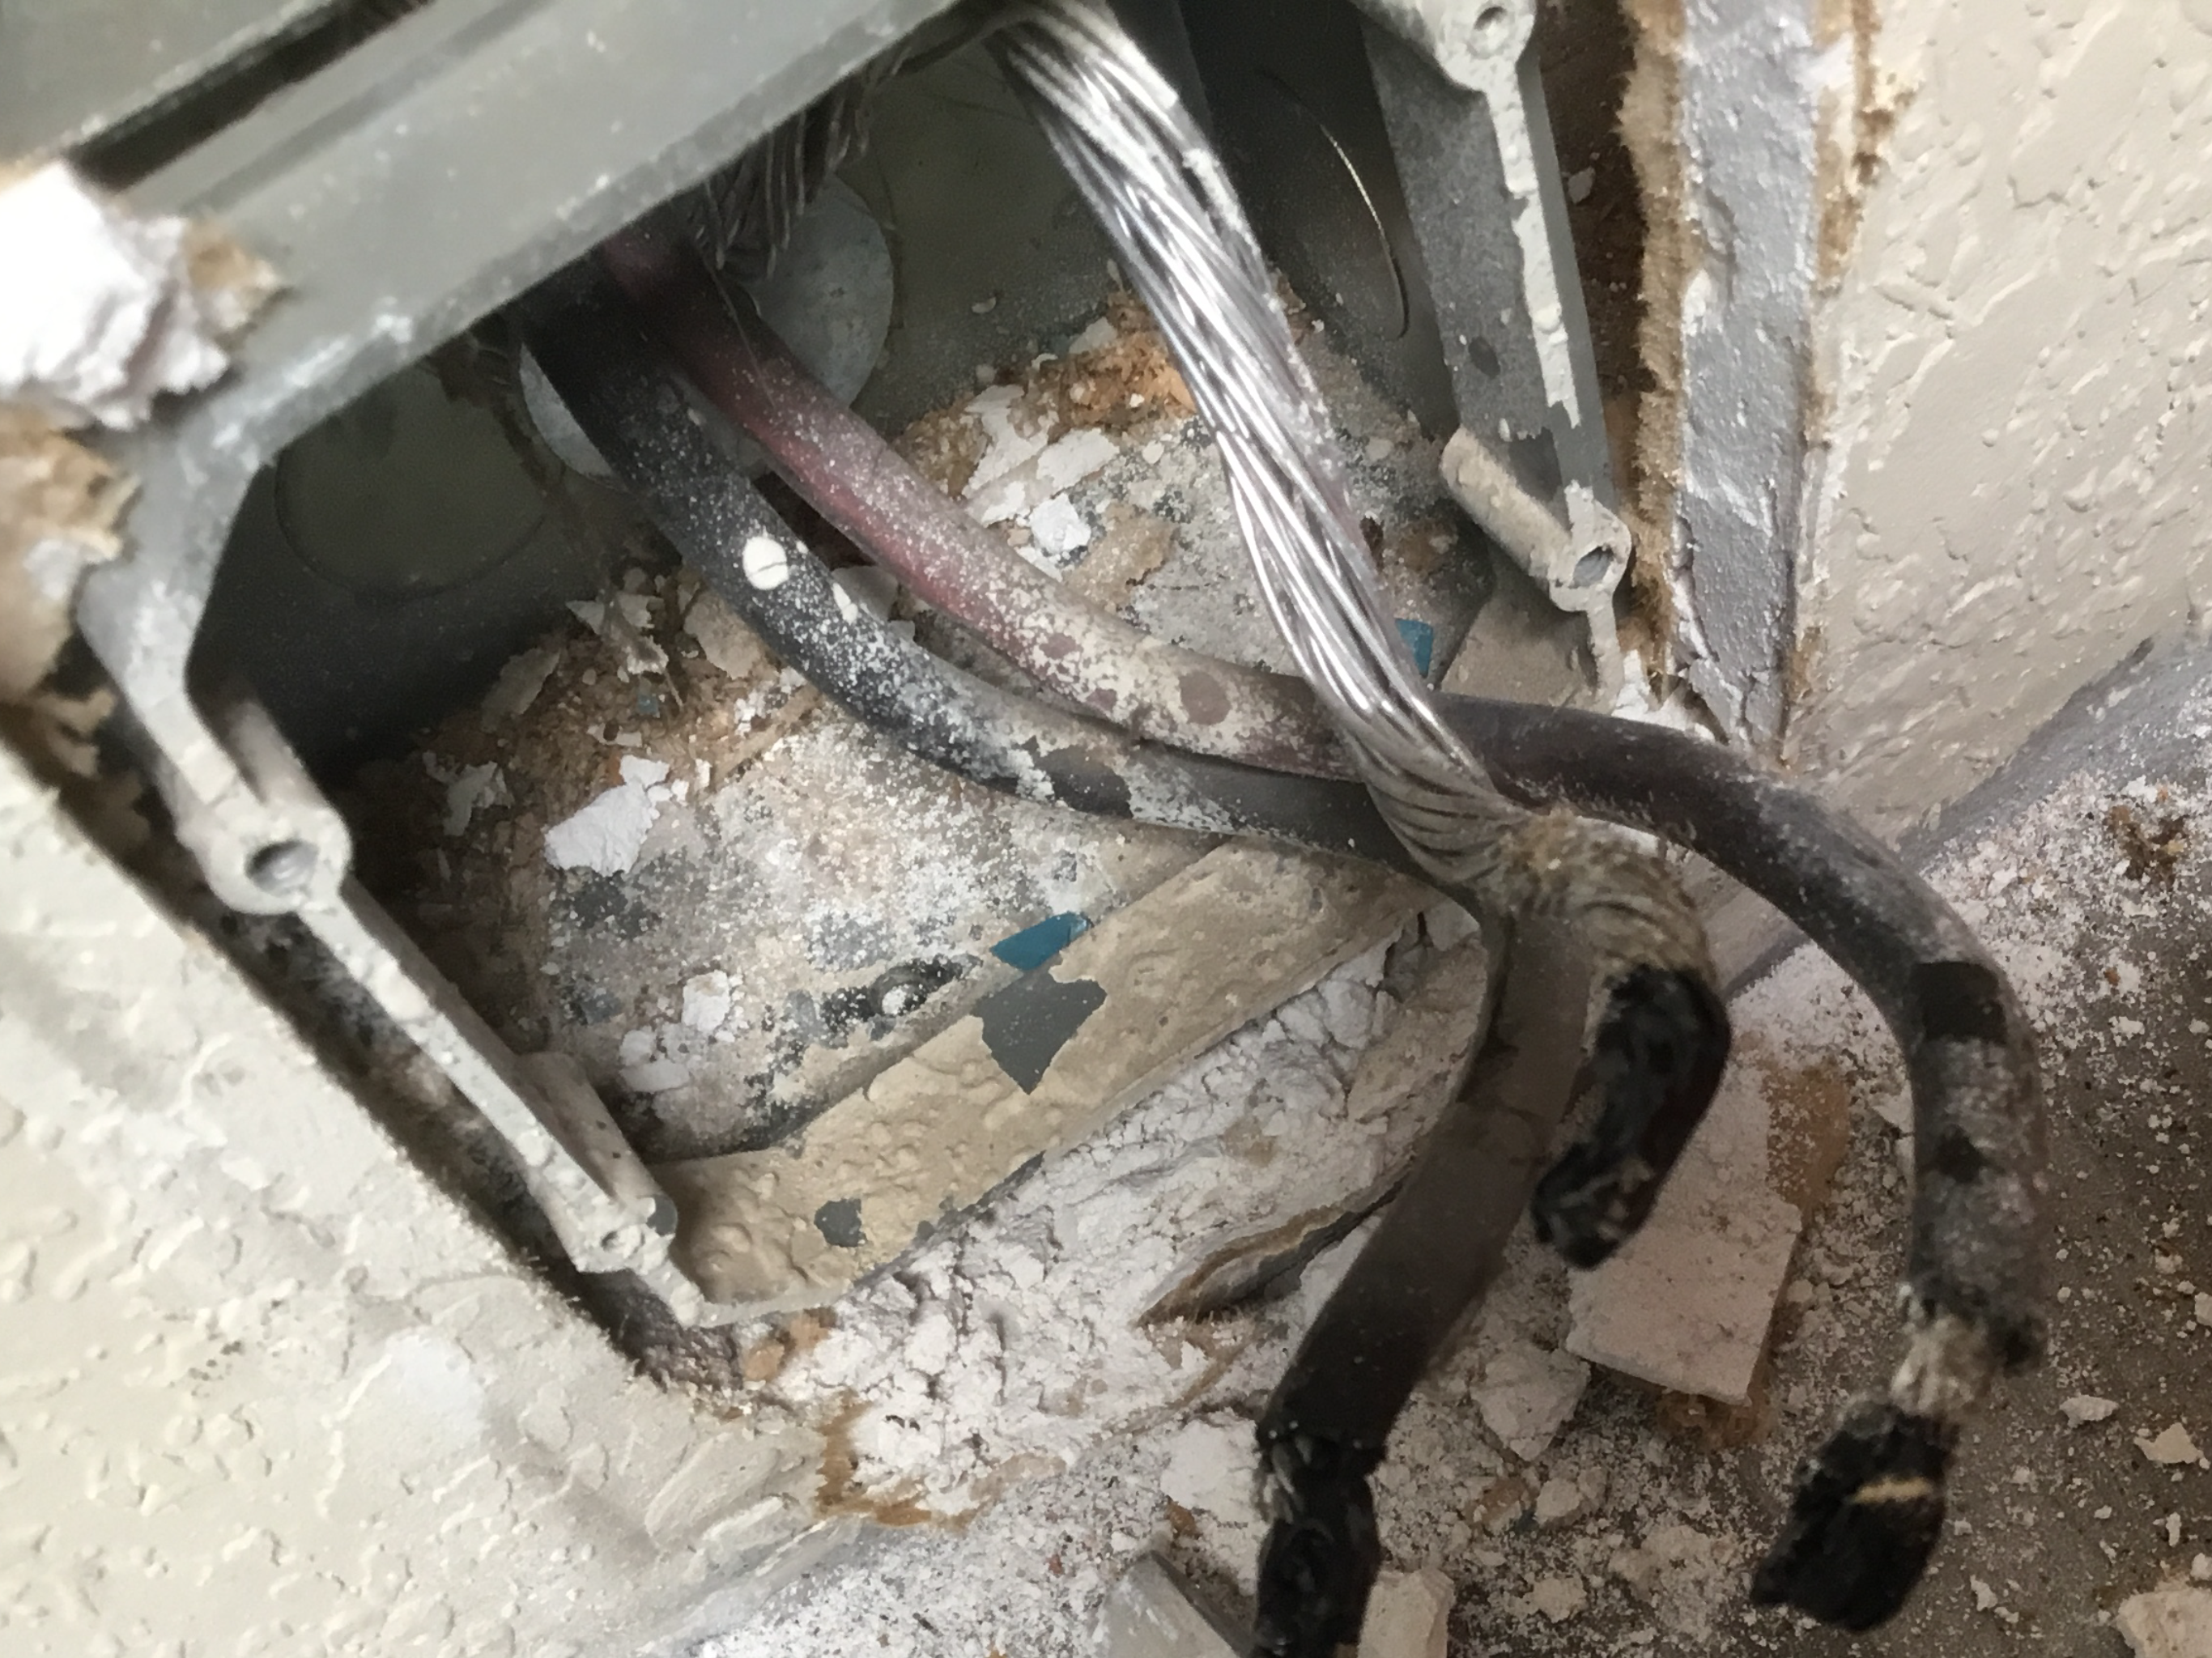  It's pretty obvious this house has aluminum wire  mr. useless Home Inspector 